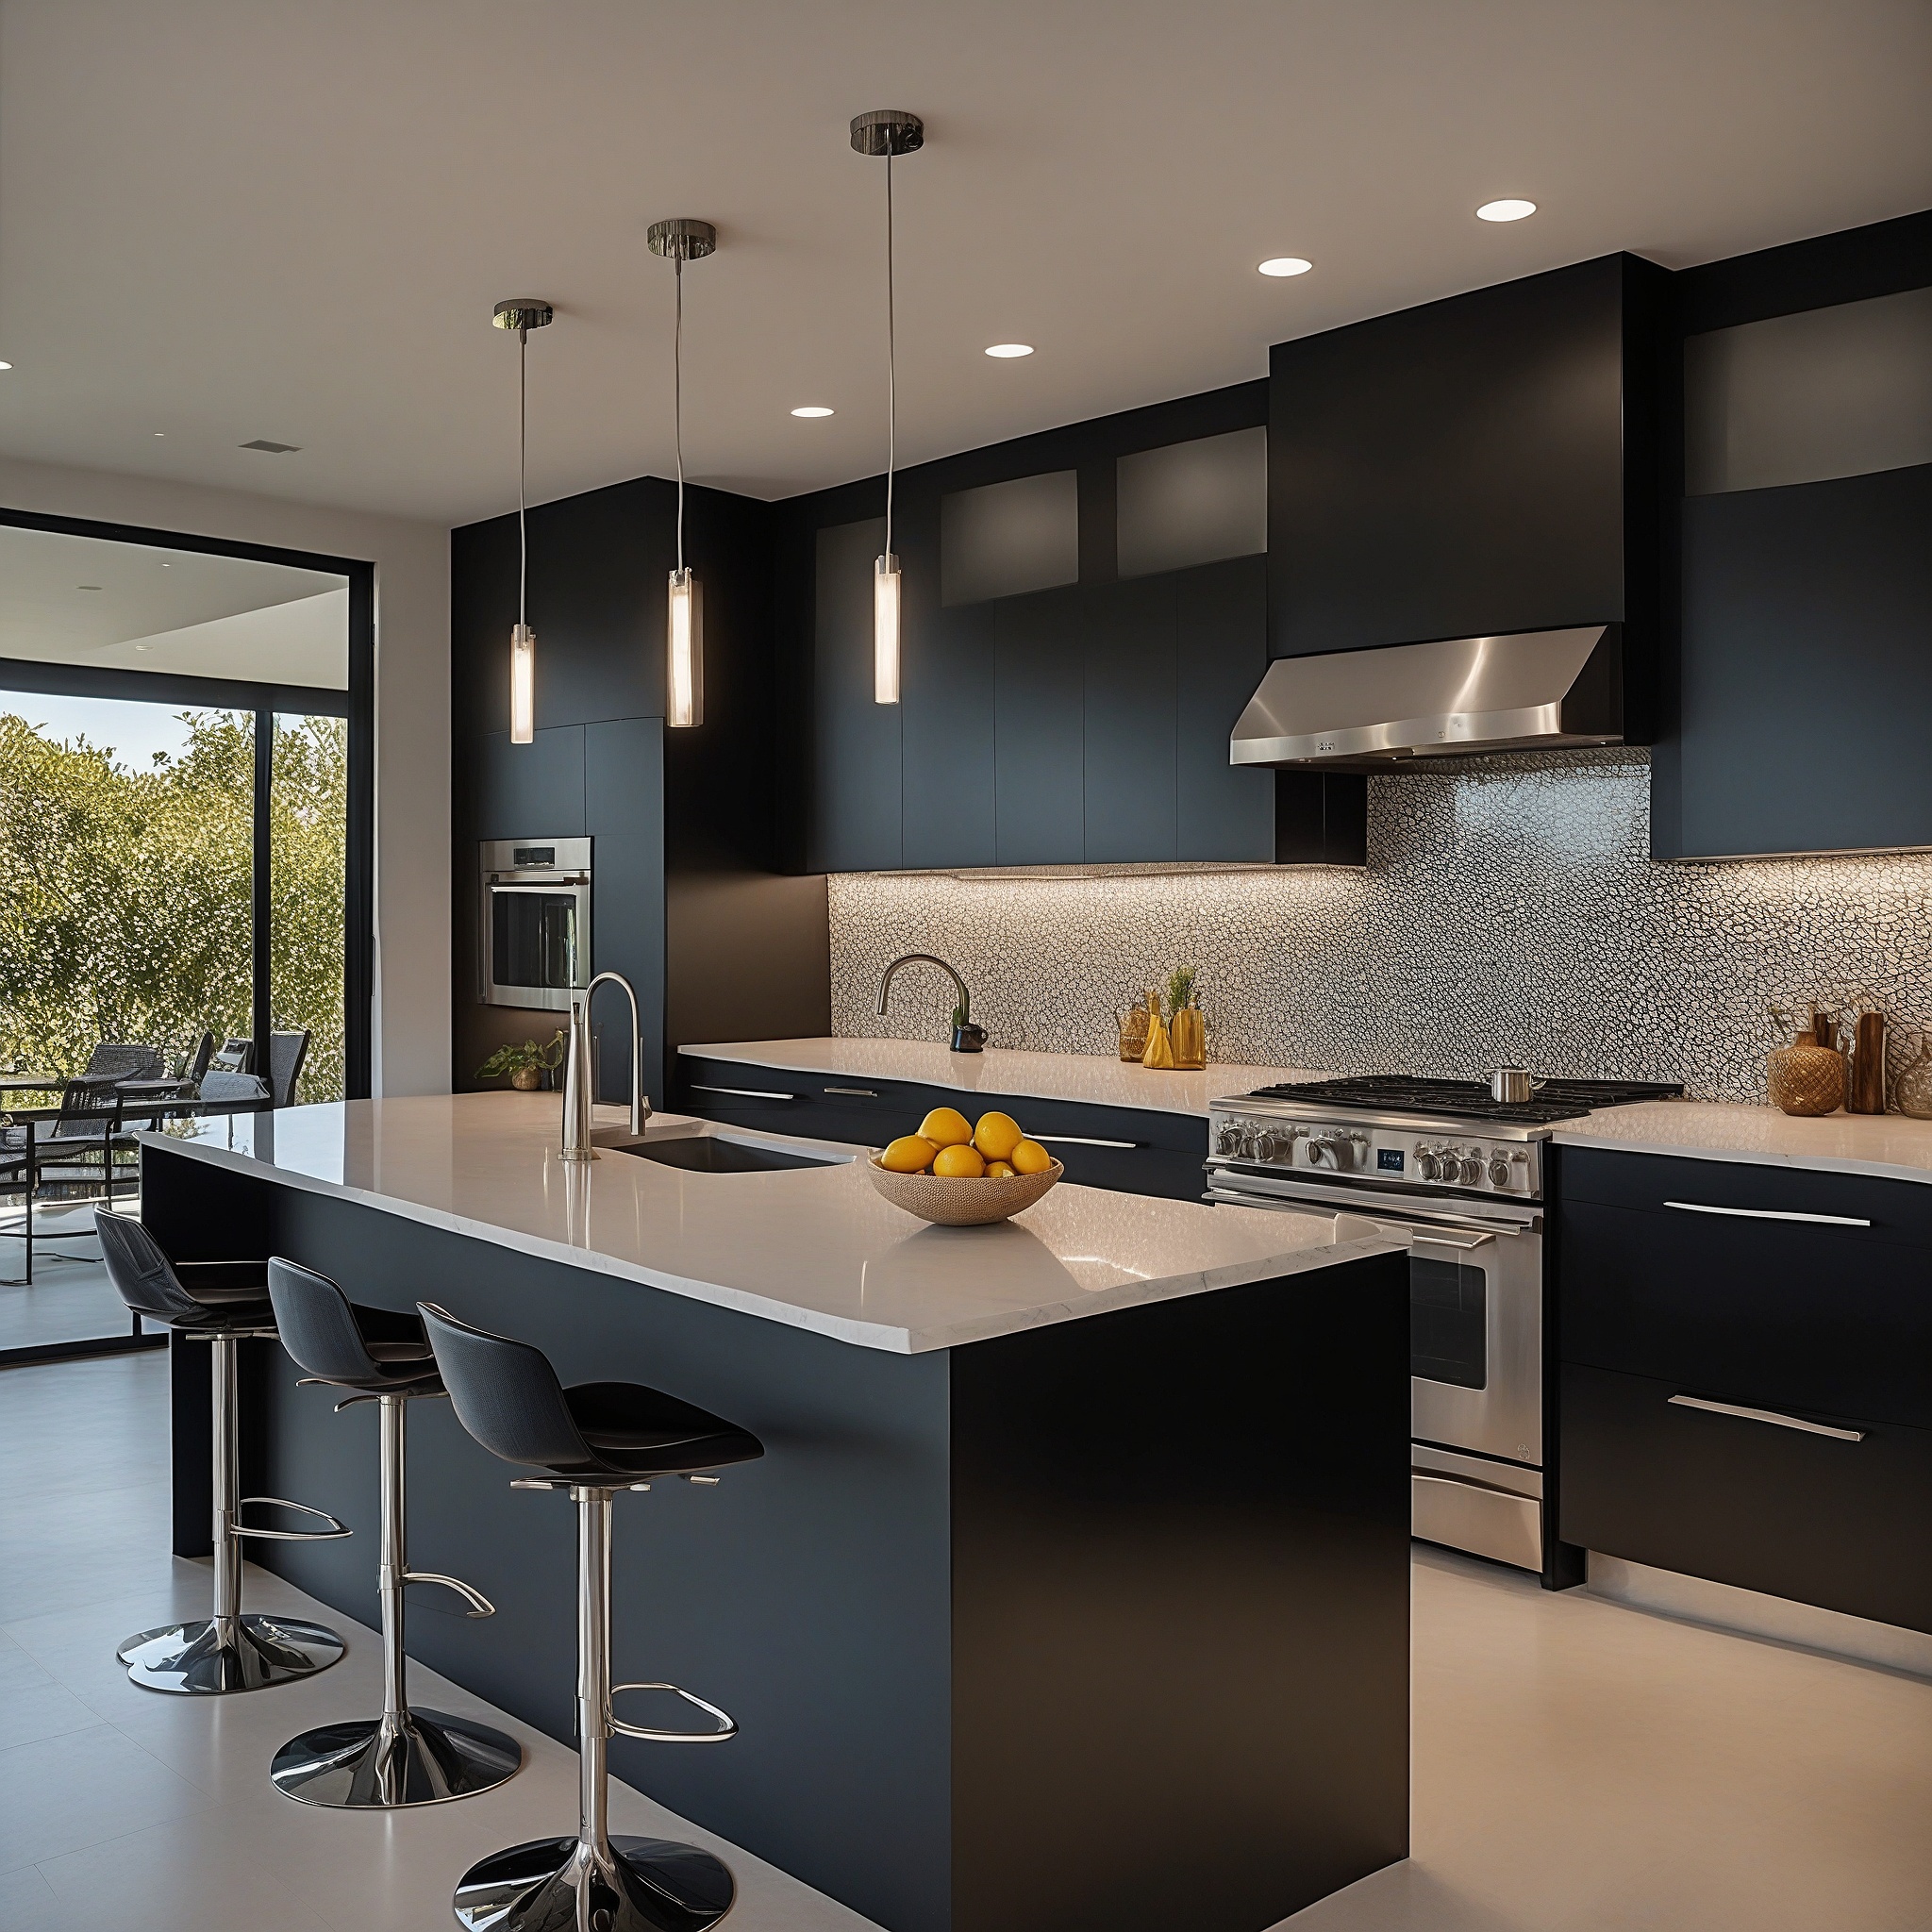 High-gloss Black Cabinets, Glass-front Upper Cabinets